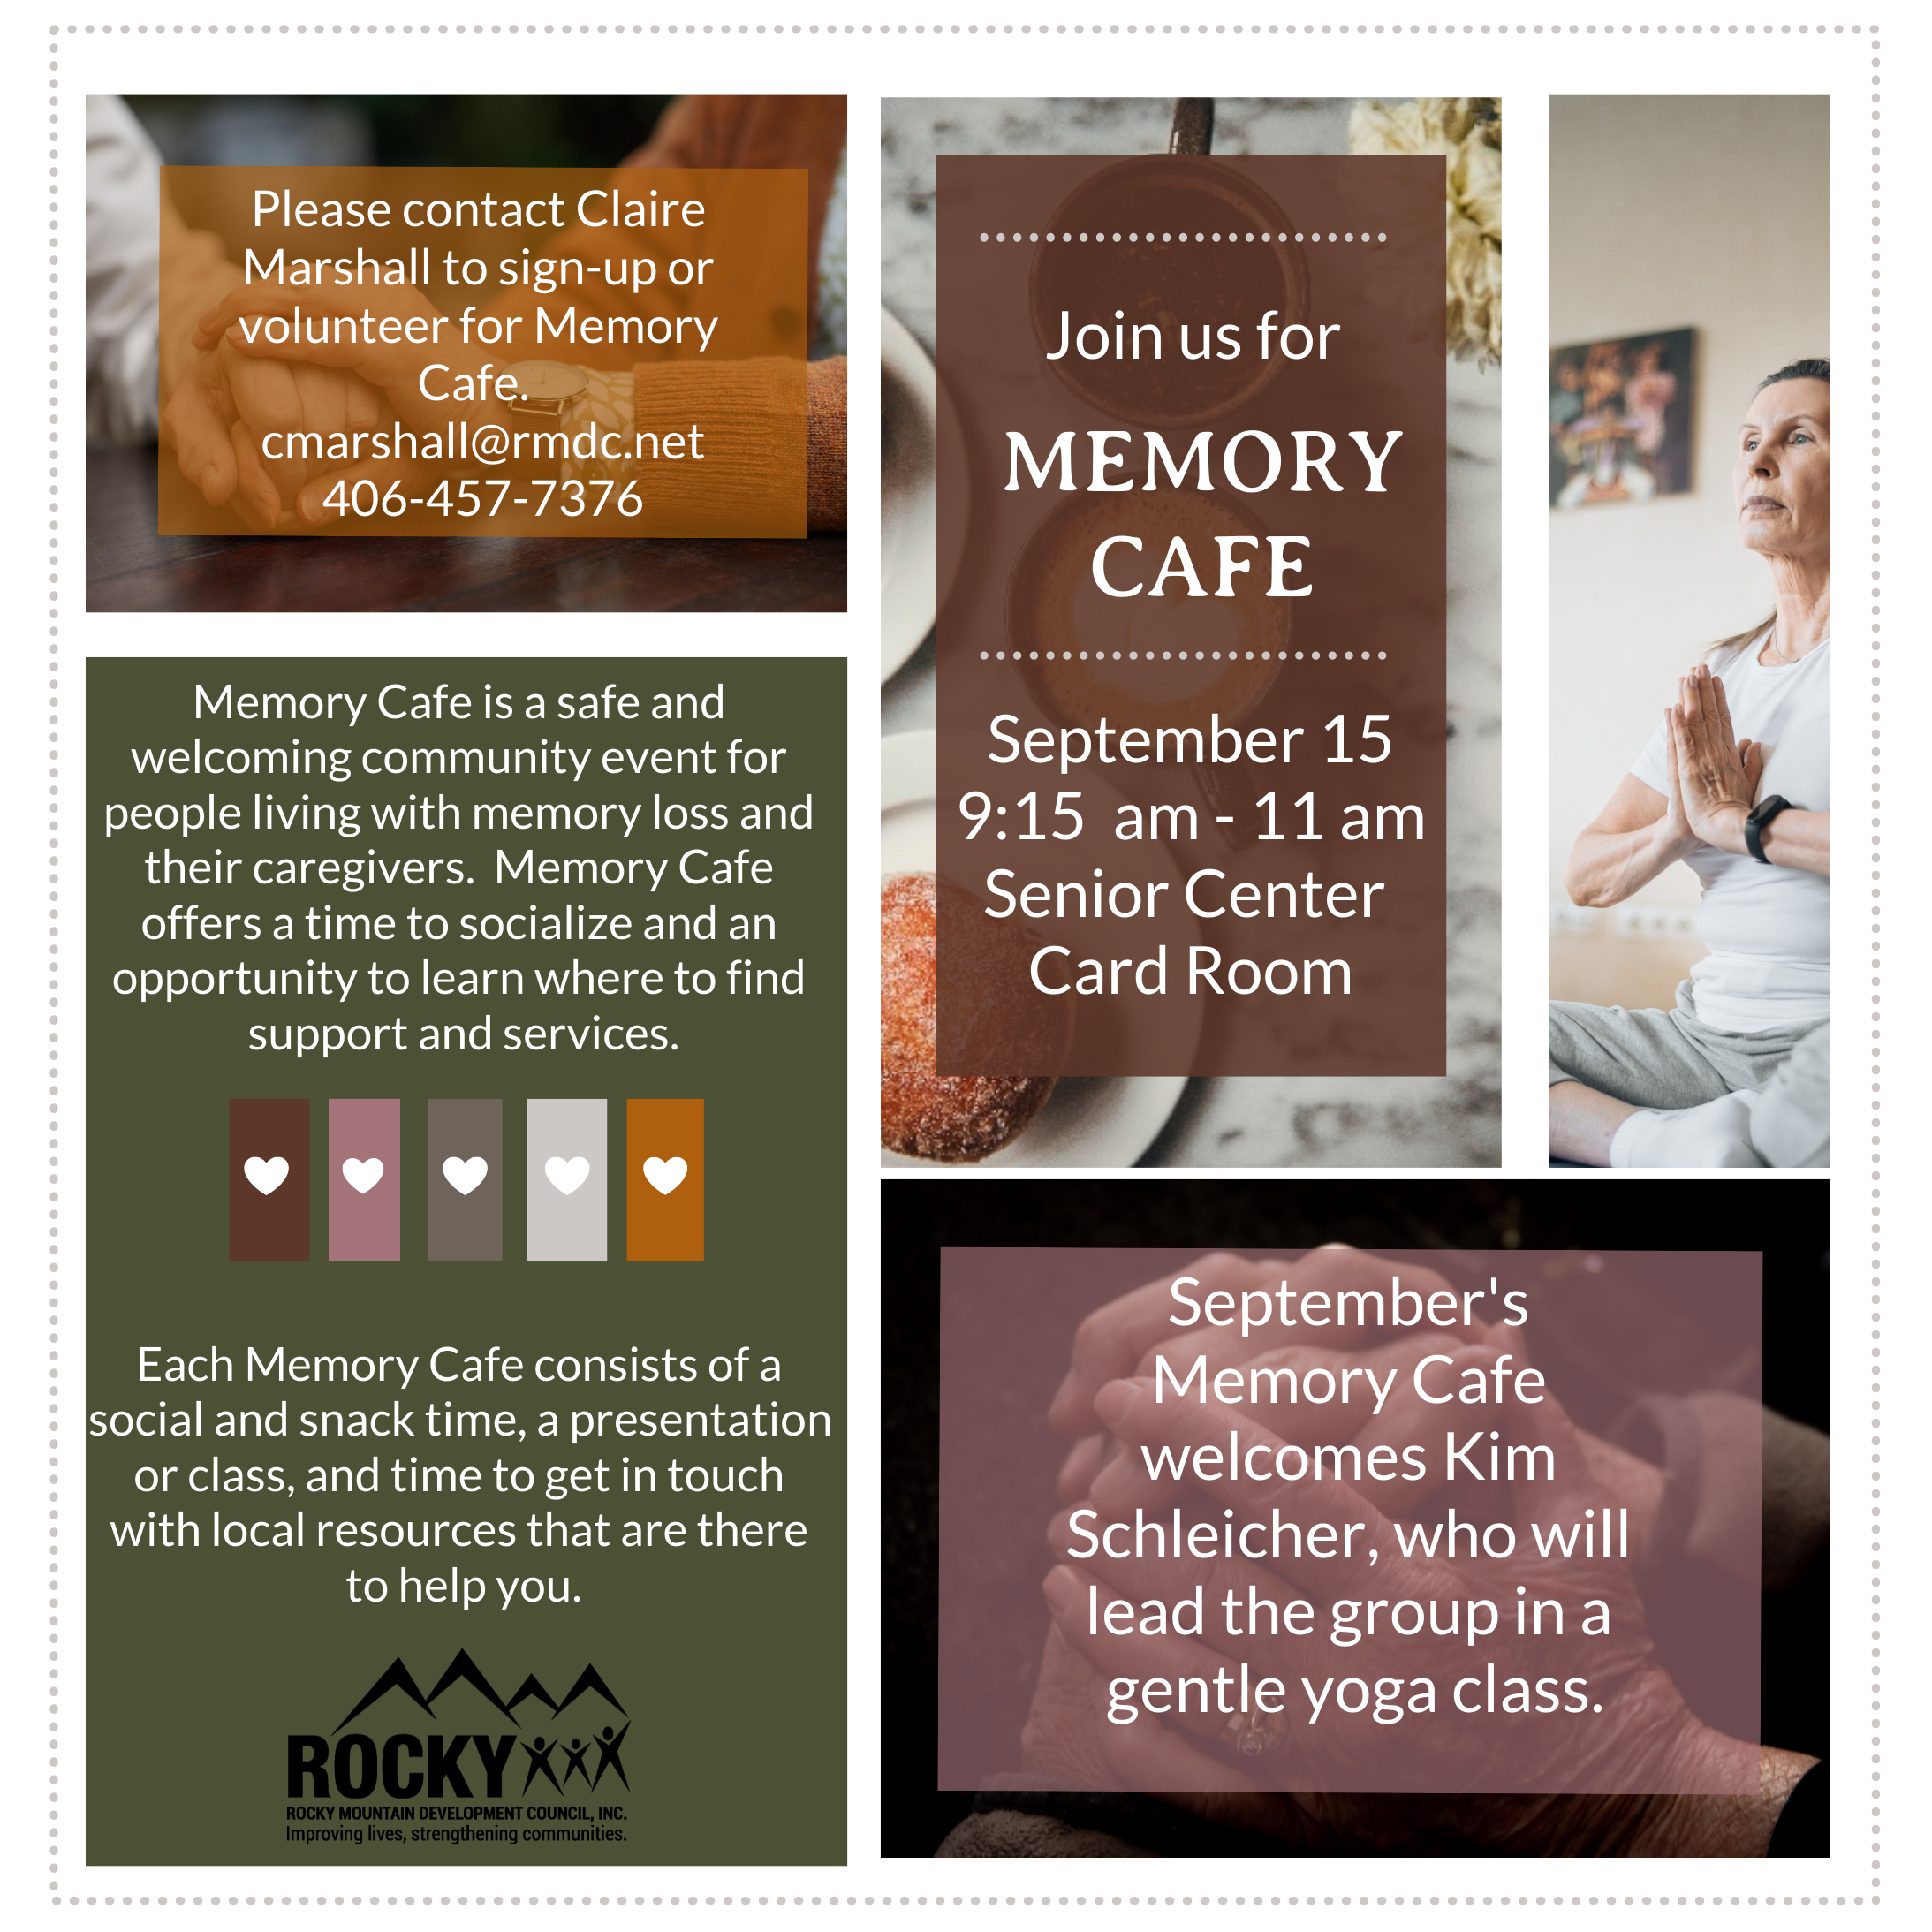 Memory Cafe is a safe and welcoming community event for people living with memory loss and their caregivers.